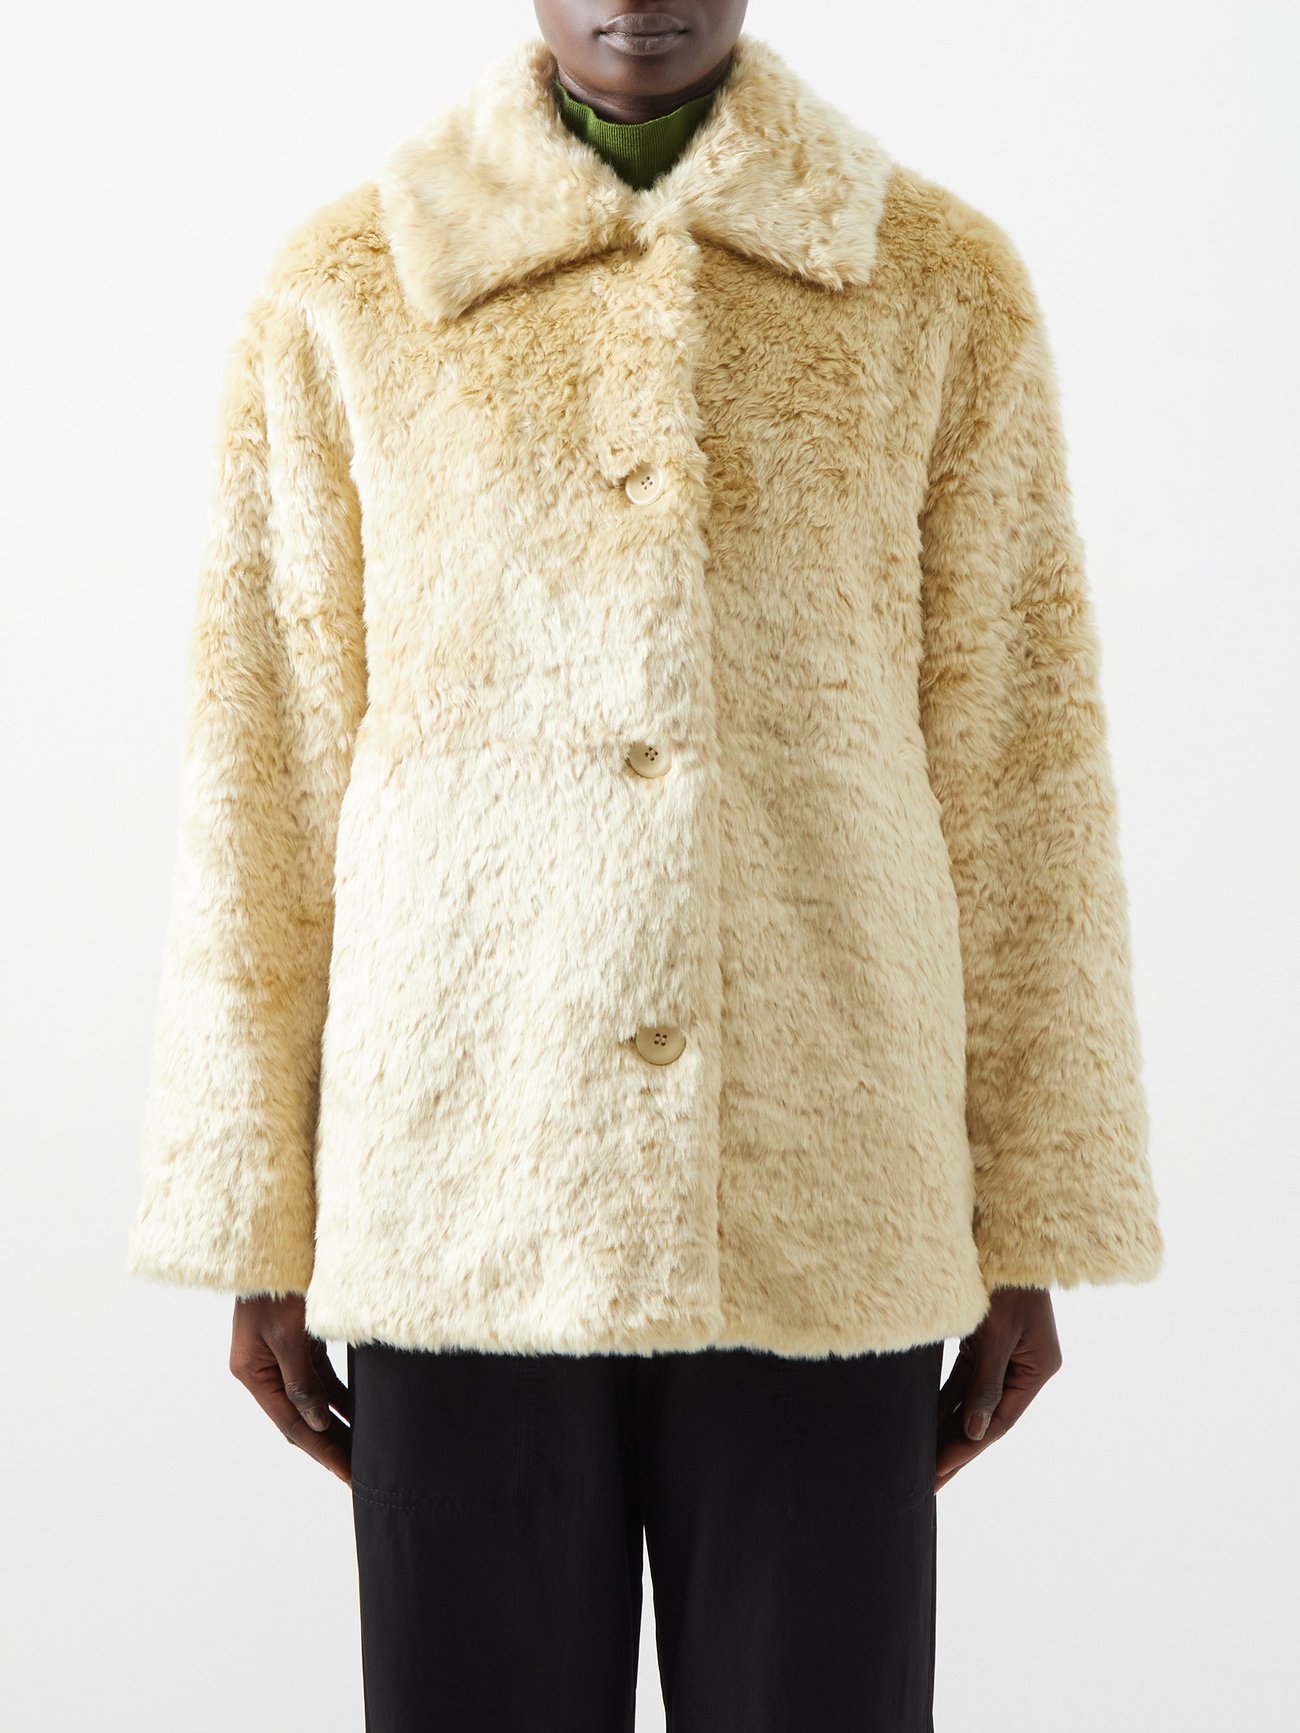 This eggshell-yellow coat by Proenza Schouler White Label is crafted from faux fur with a spread collar and button front for an elegant note.